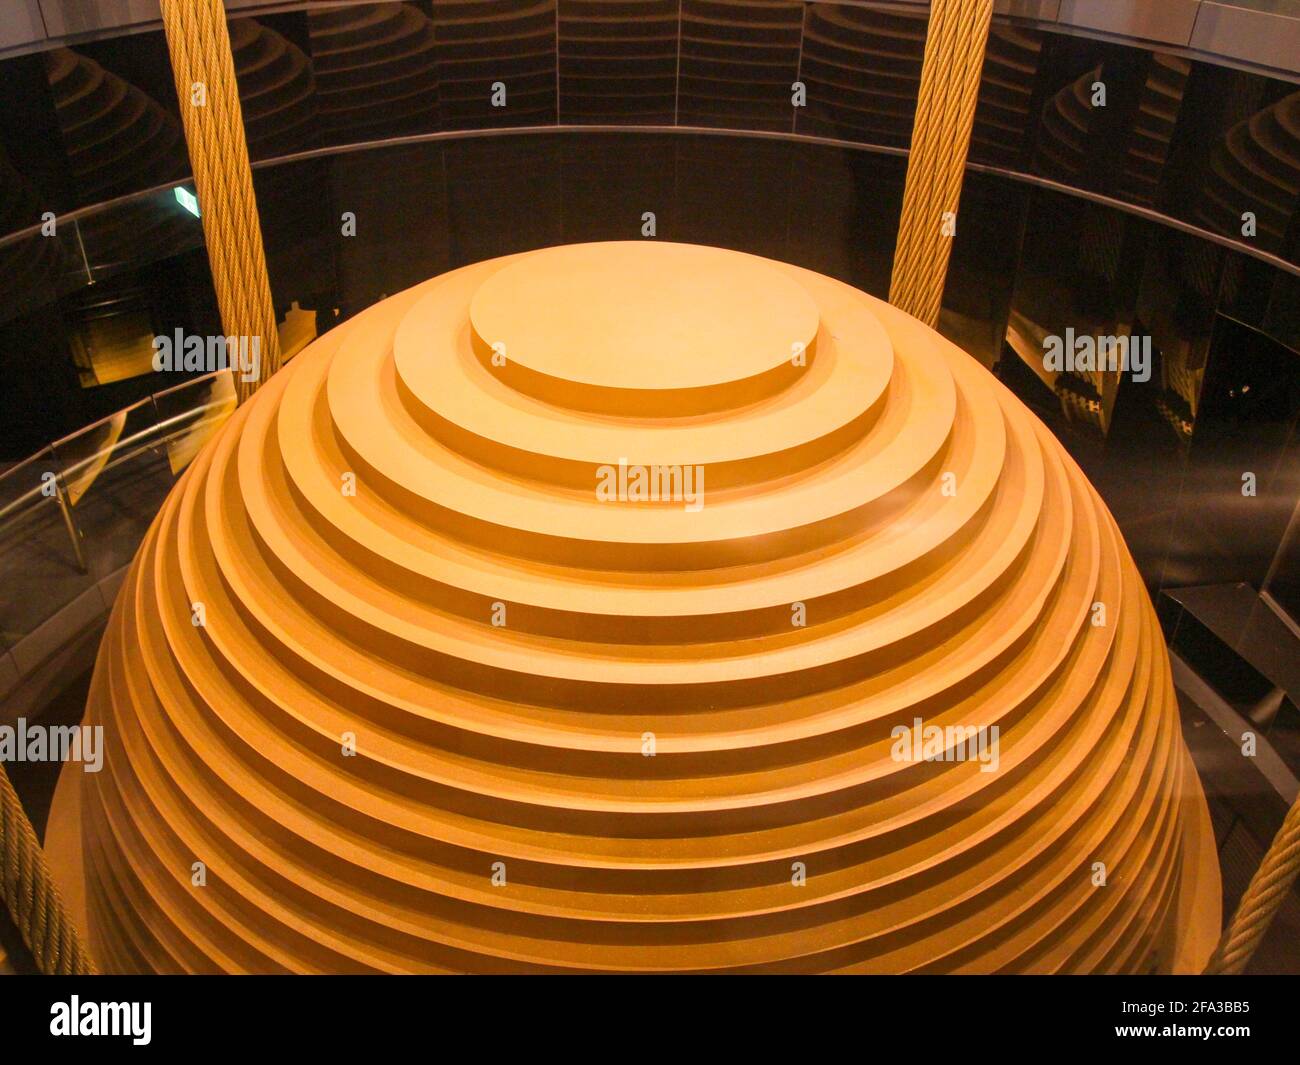 Looking down at the big gold painted steel plate sway damper. In Taipei, Taiwan. Stock Photo